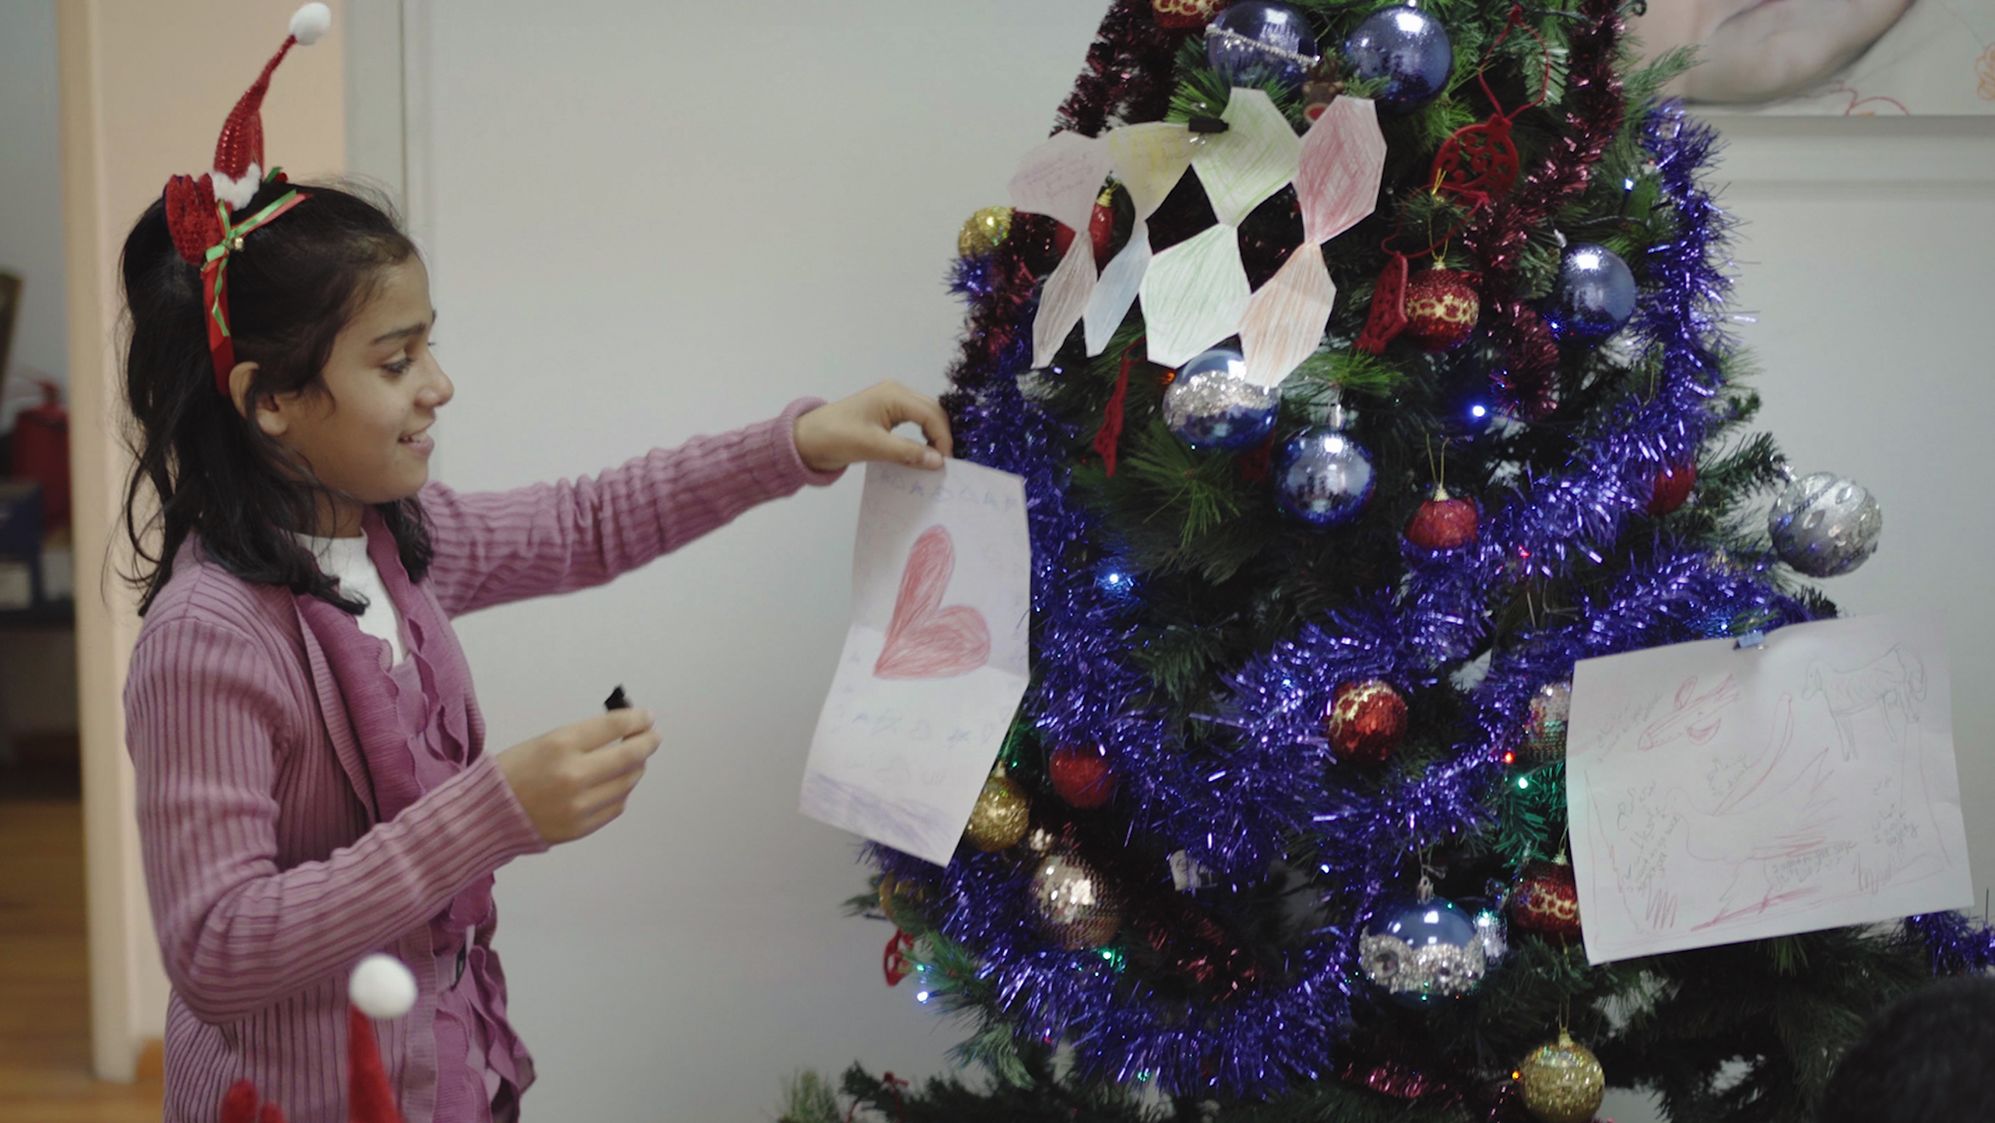 One of INARA's children places a decoration she made with her holiday wishes written on it onto a Christmas tree.